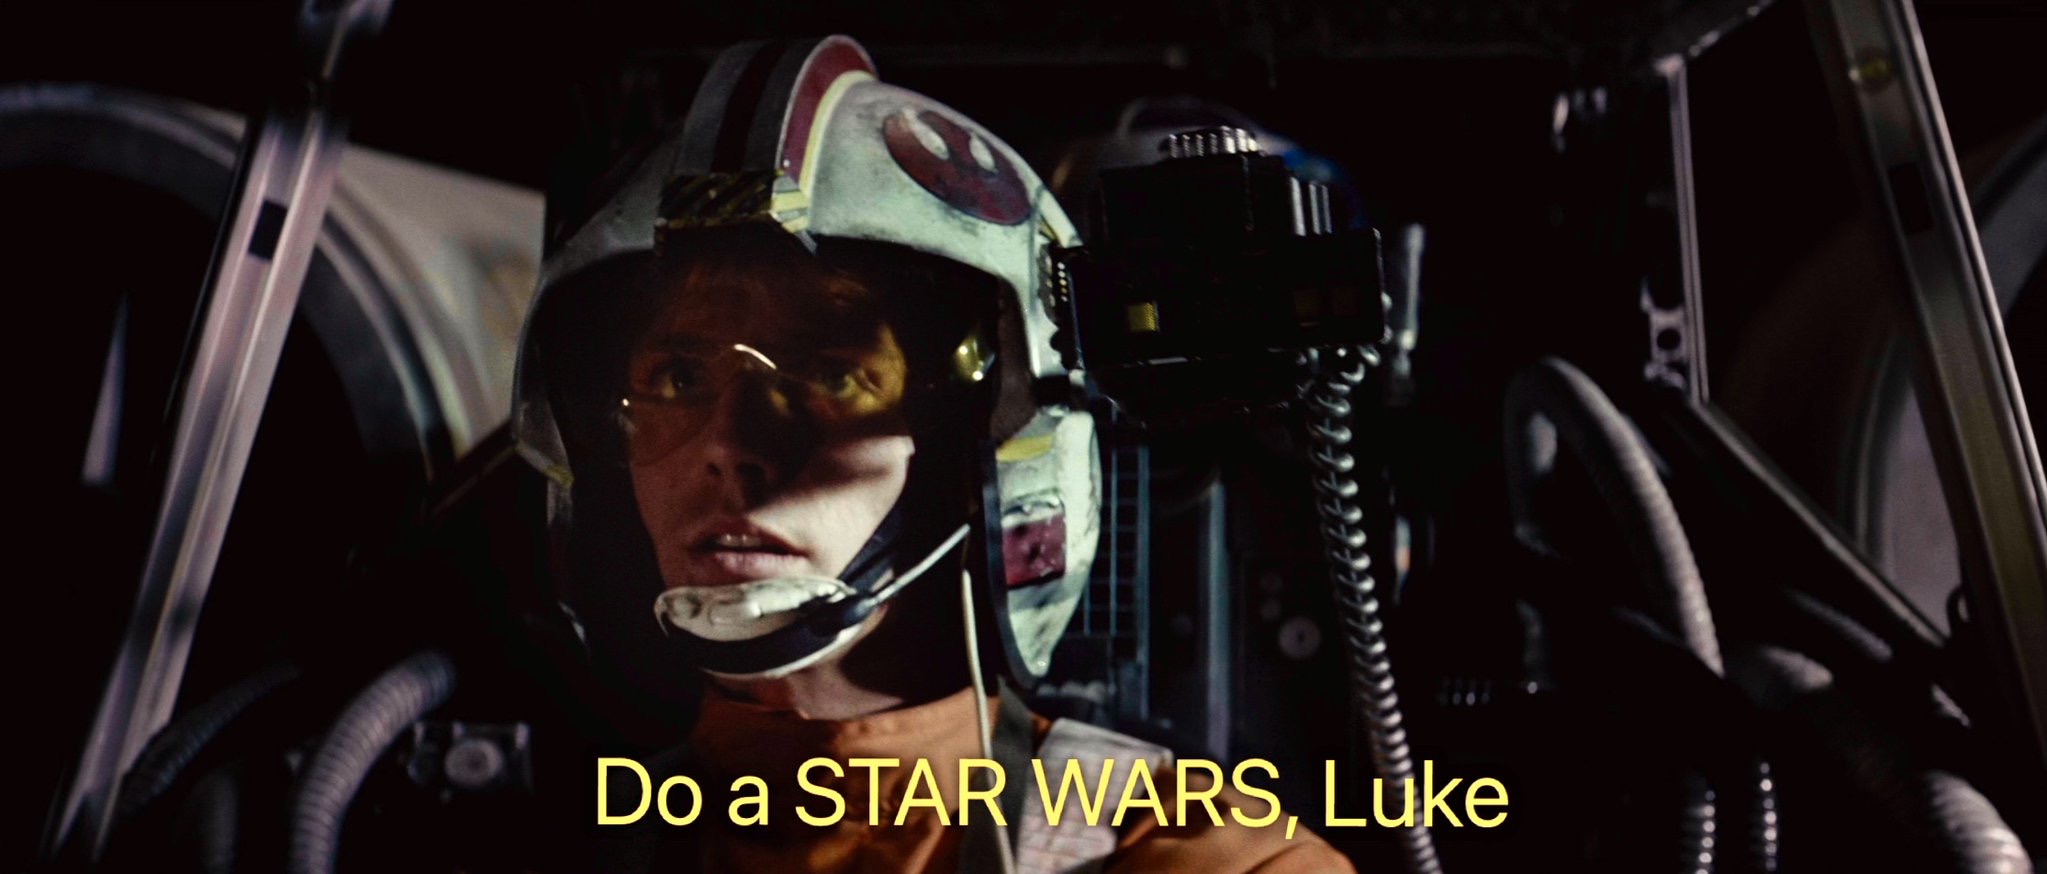 He Didn't Say That -Movie Titles in Movie Lines- X-wing Starfighter - Do a Star Wars, Luke